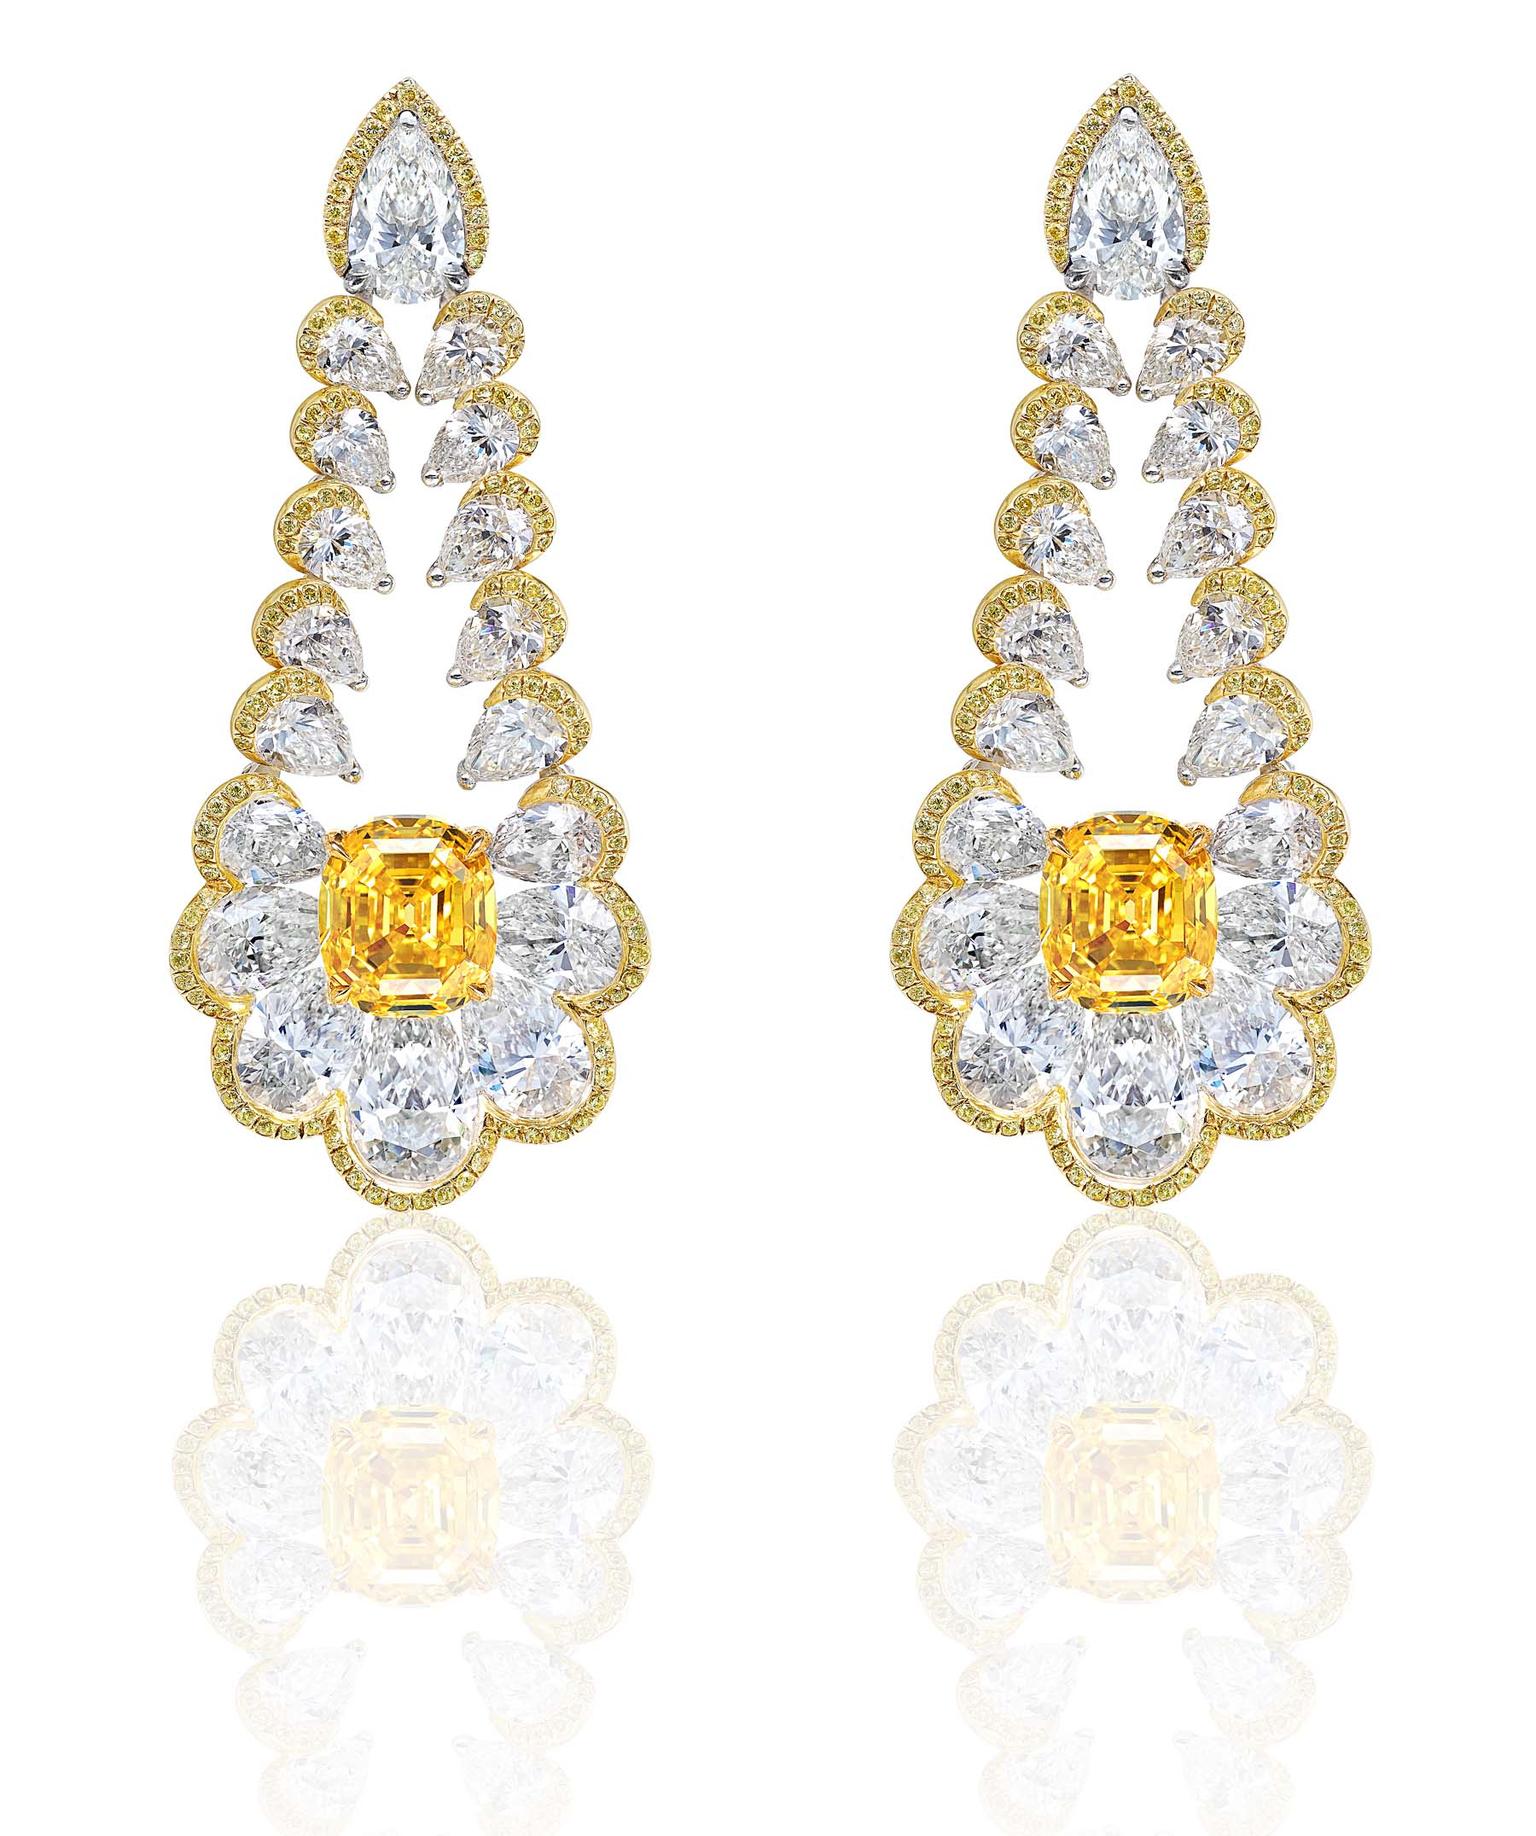 Chopard Red Carpet Collection 2014 earrings